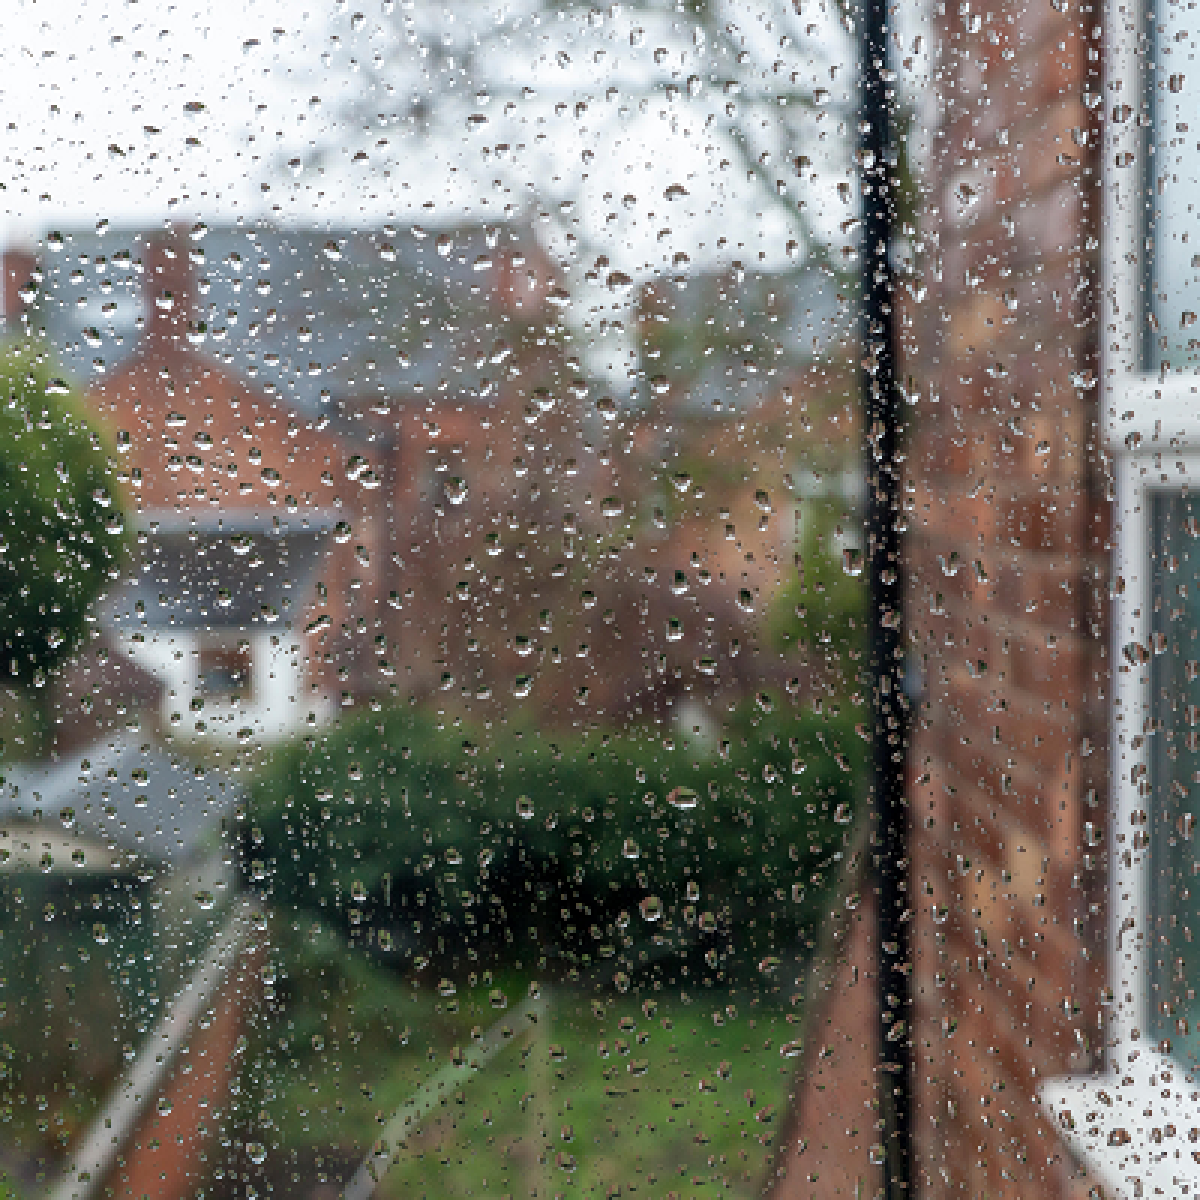 Top causes of damp in UK homes